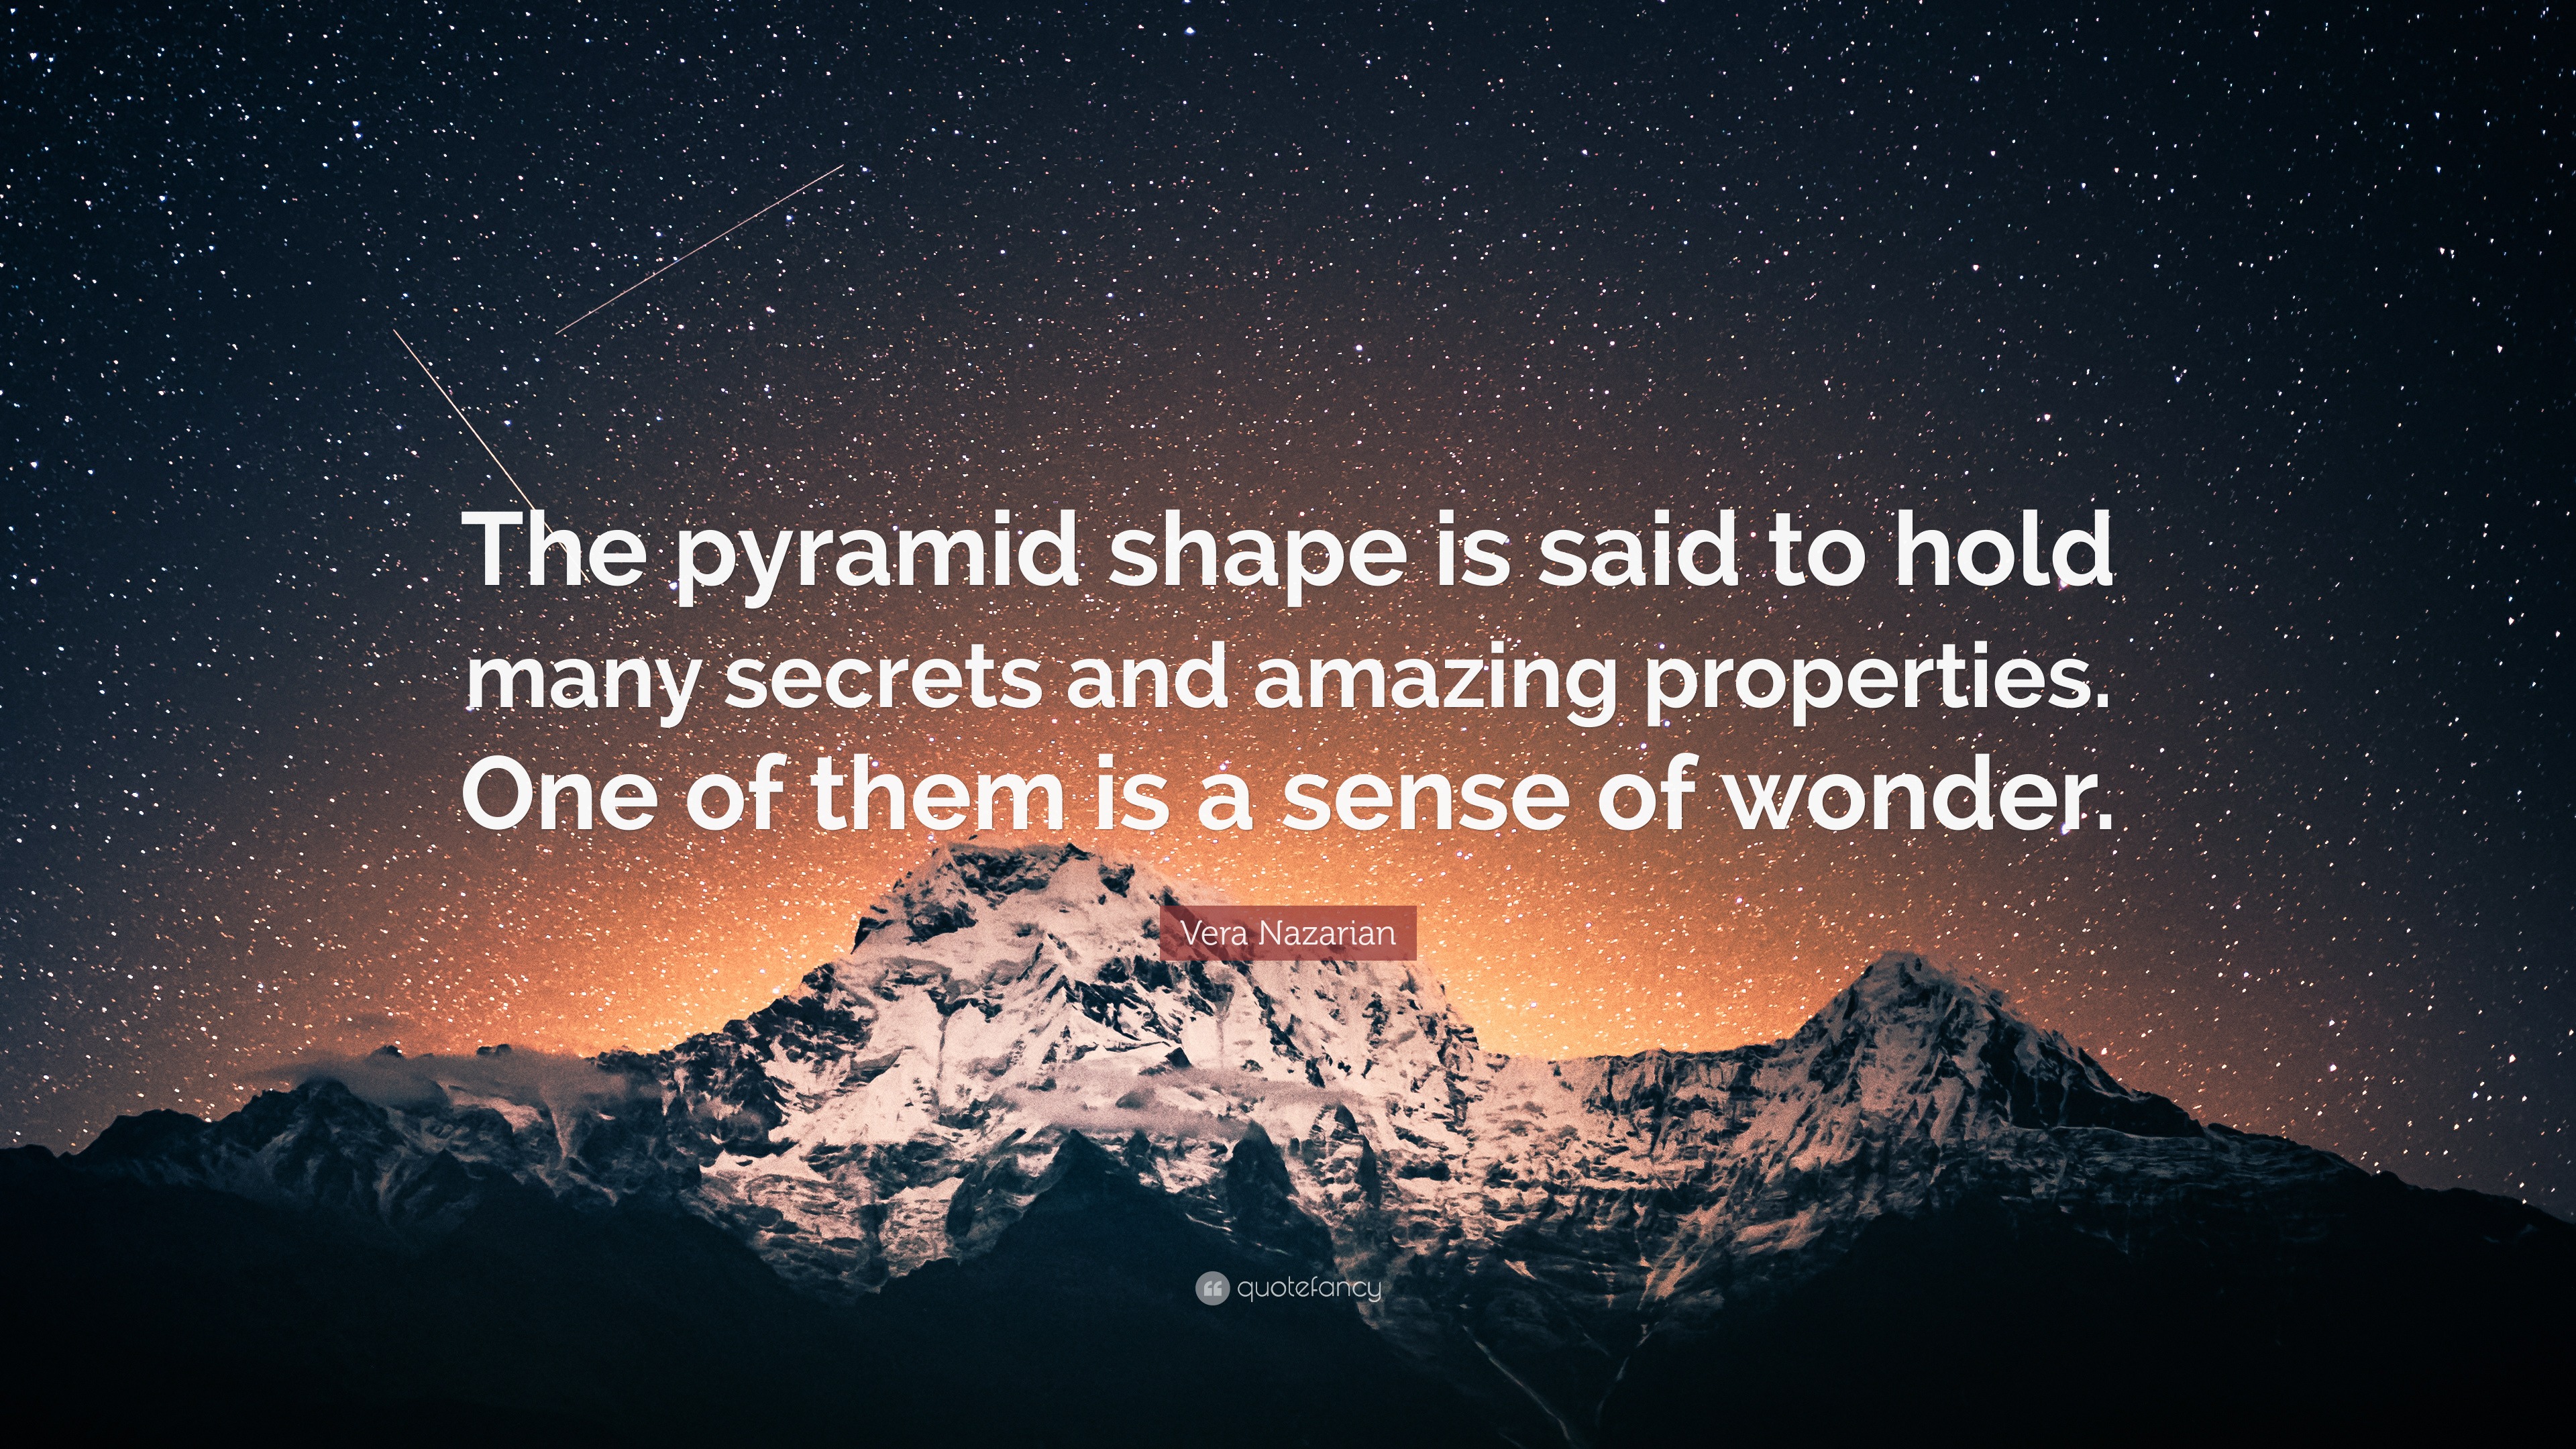 Vera Nazarian Quote: “The pyramid shape is said to hold many secrets and  amazing properties. One